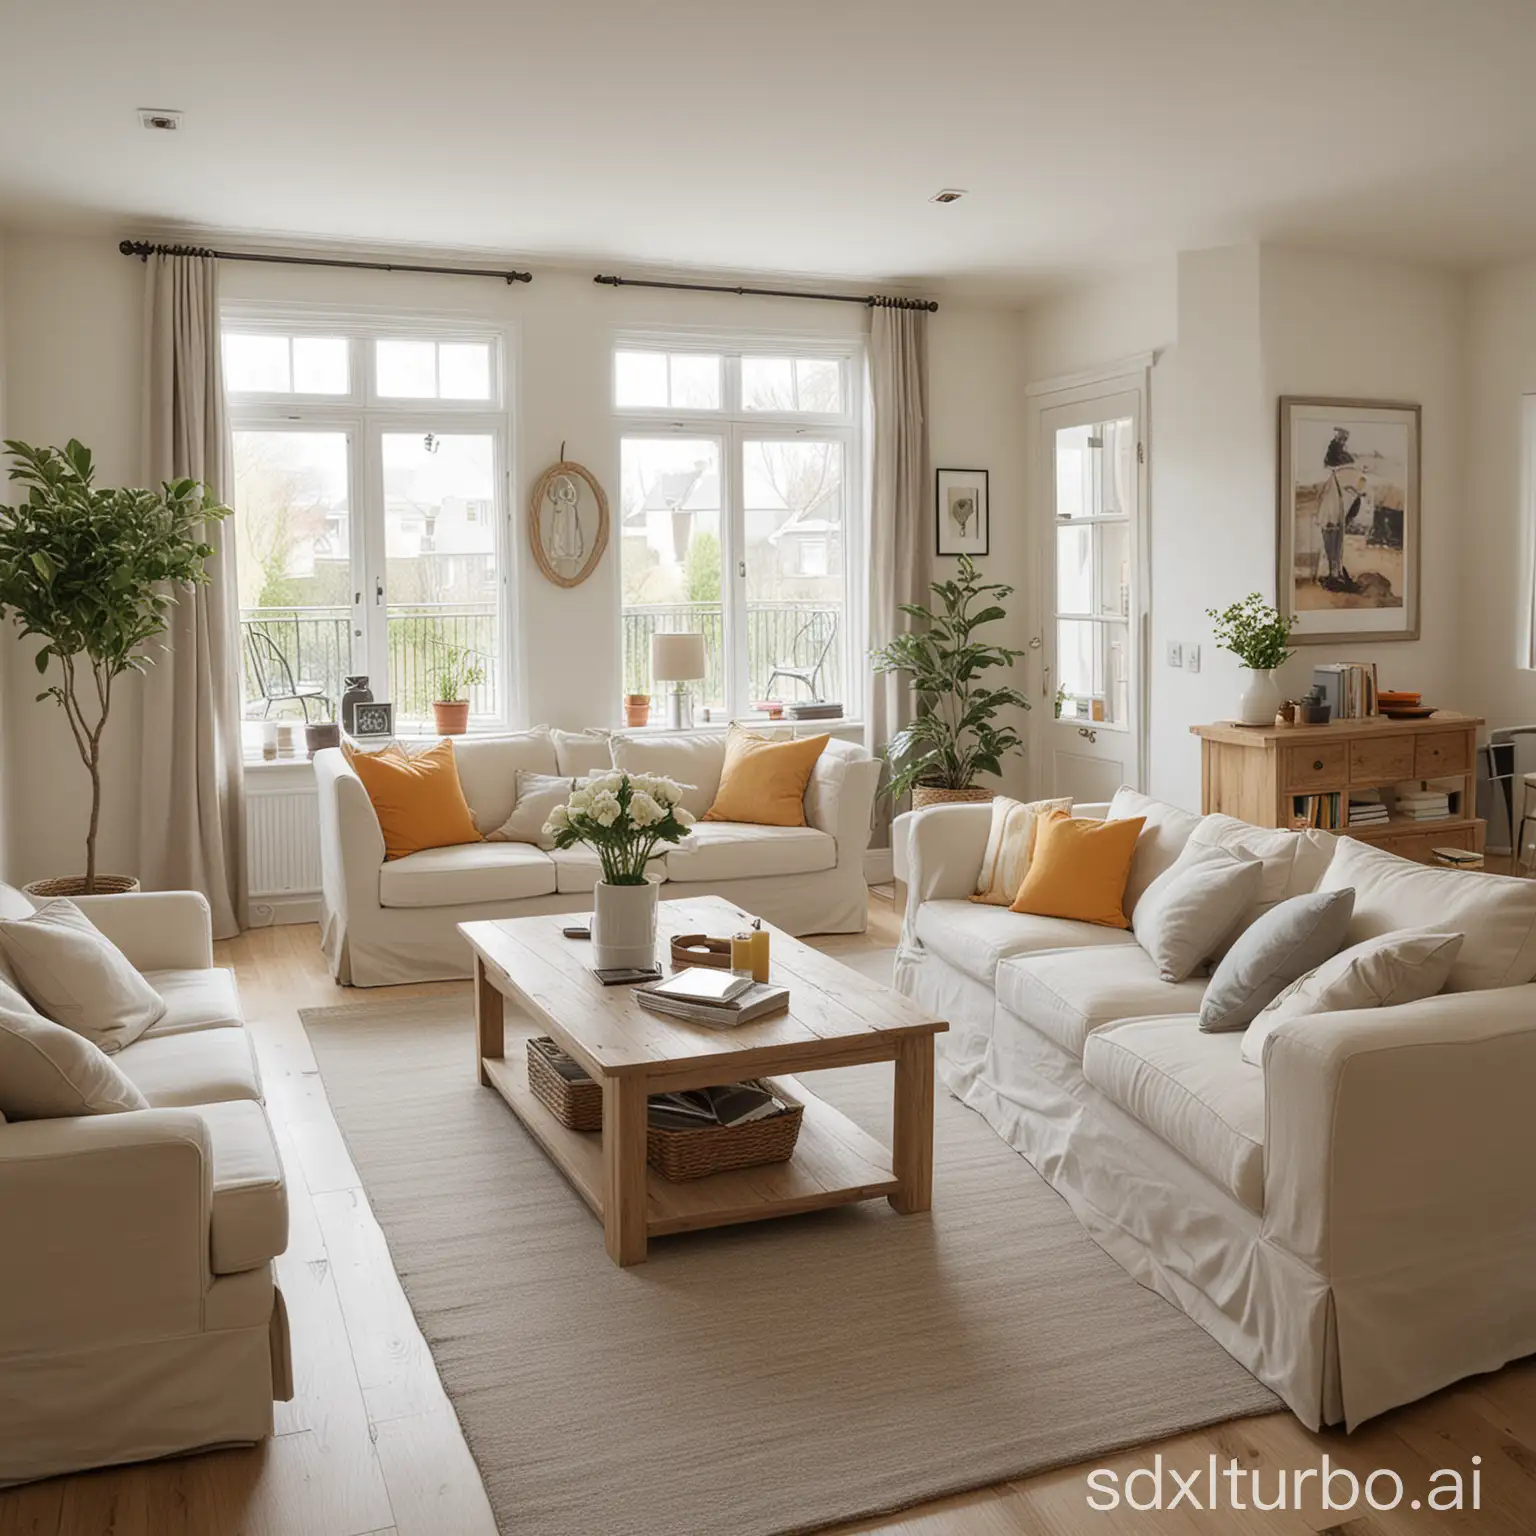 A clean and tidy living room with a bright, airy feel. The furniture is arranged in a comfortable and inviting way, and there are no signs of clutter or mess.